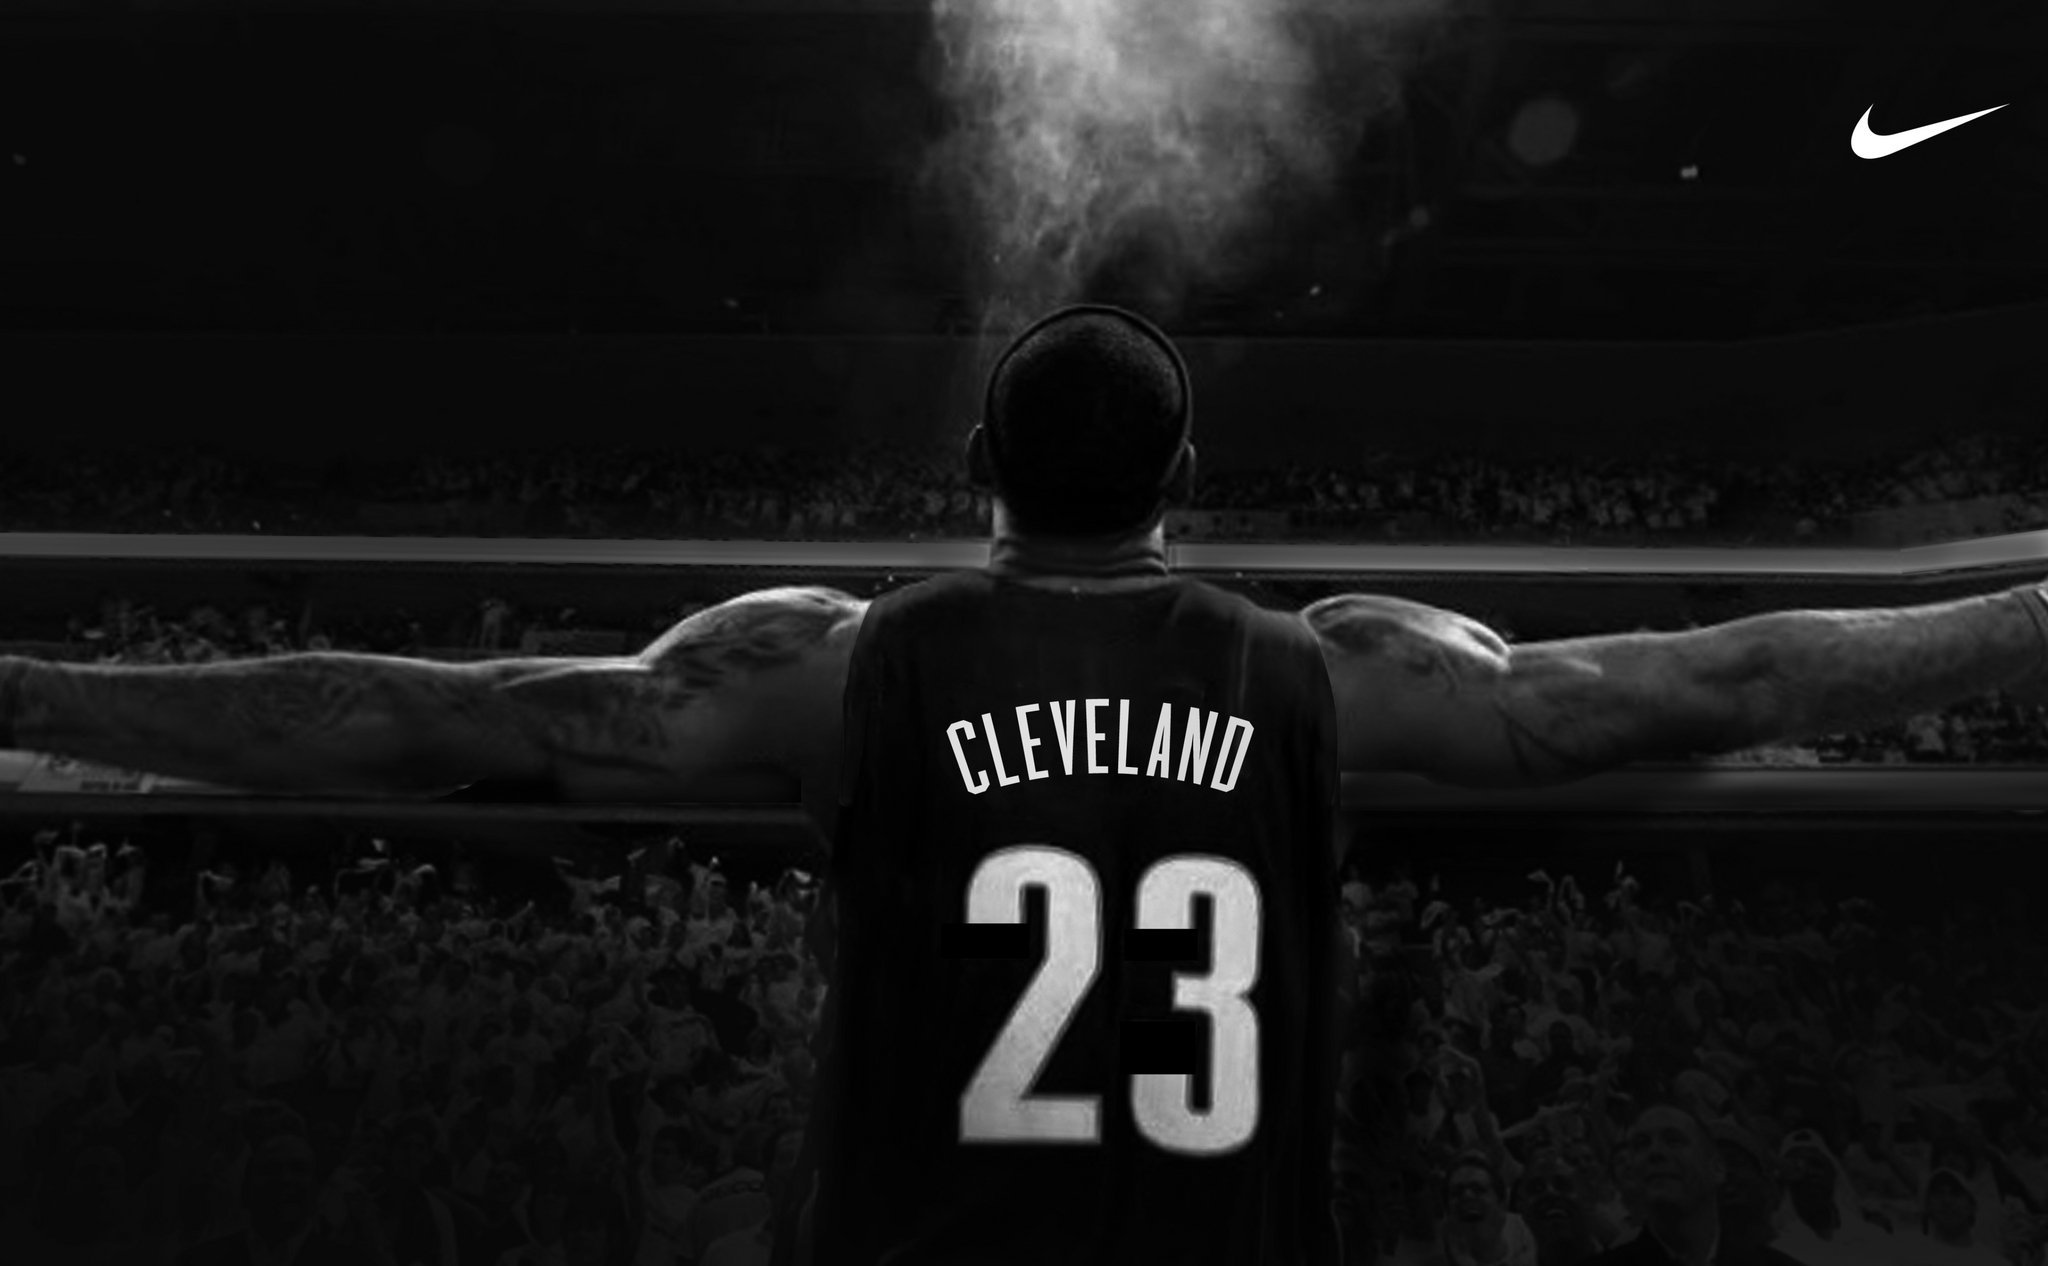 The New Lebron James Banner Is Set To Go Up Across Form Q Usatsi